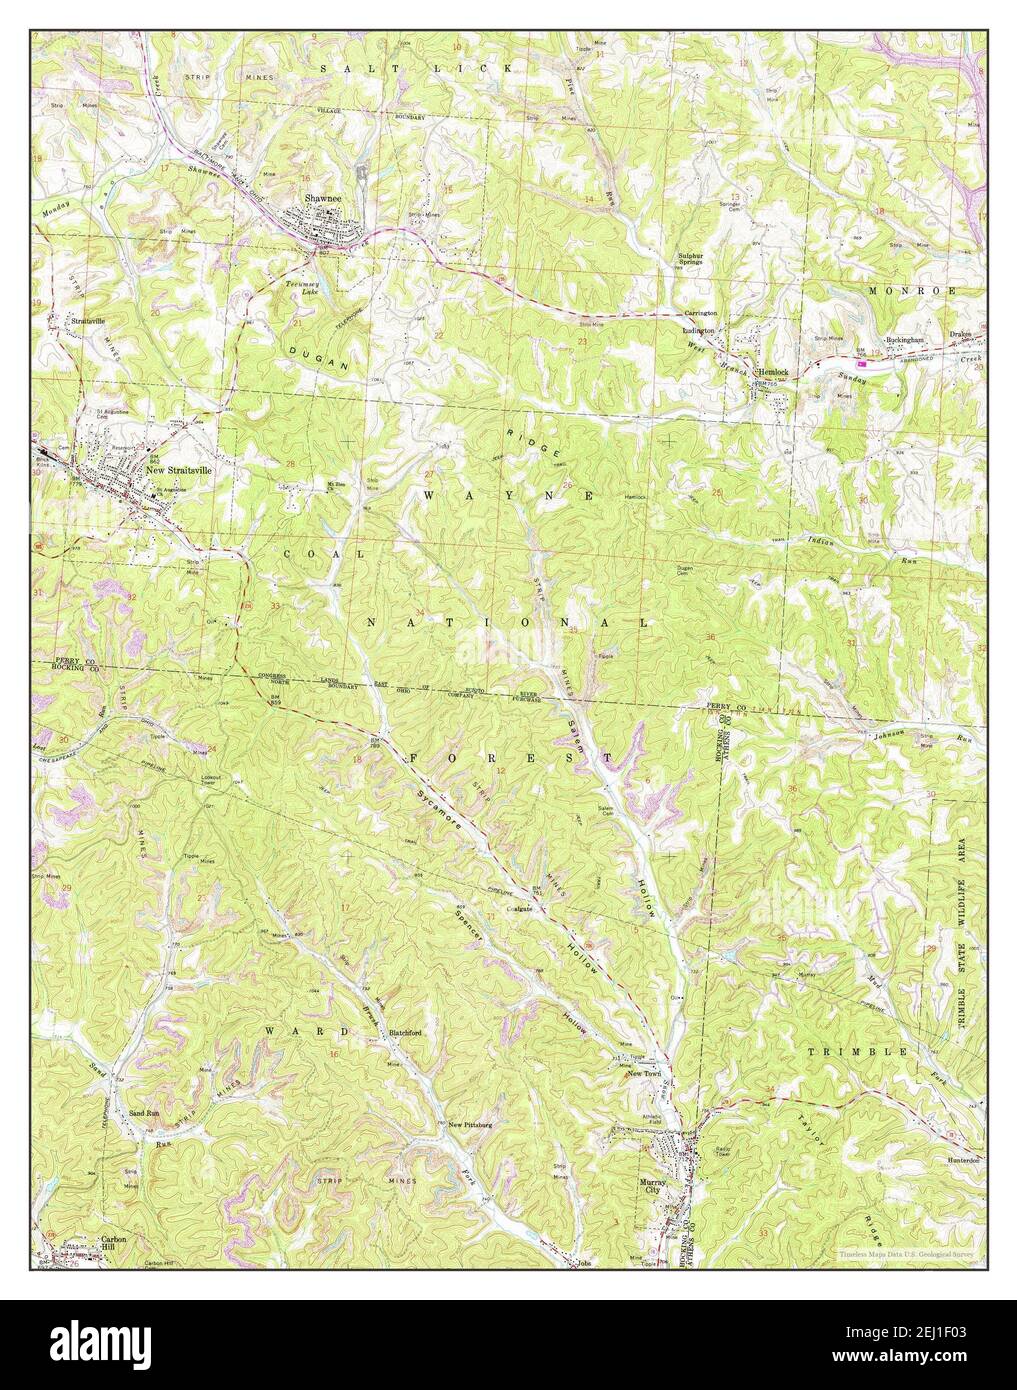 New Straitsville Ohio Map 1961 124000 United States Of America By Timeless Maps Data Us 8511